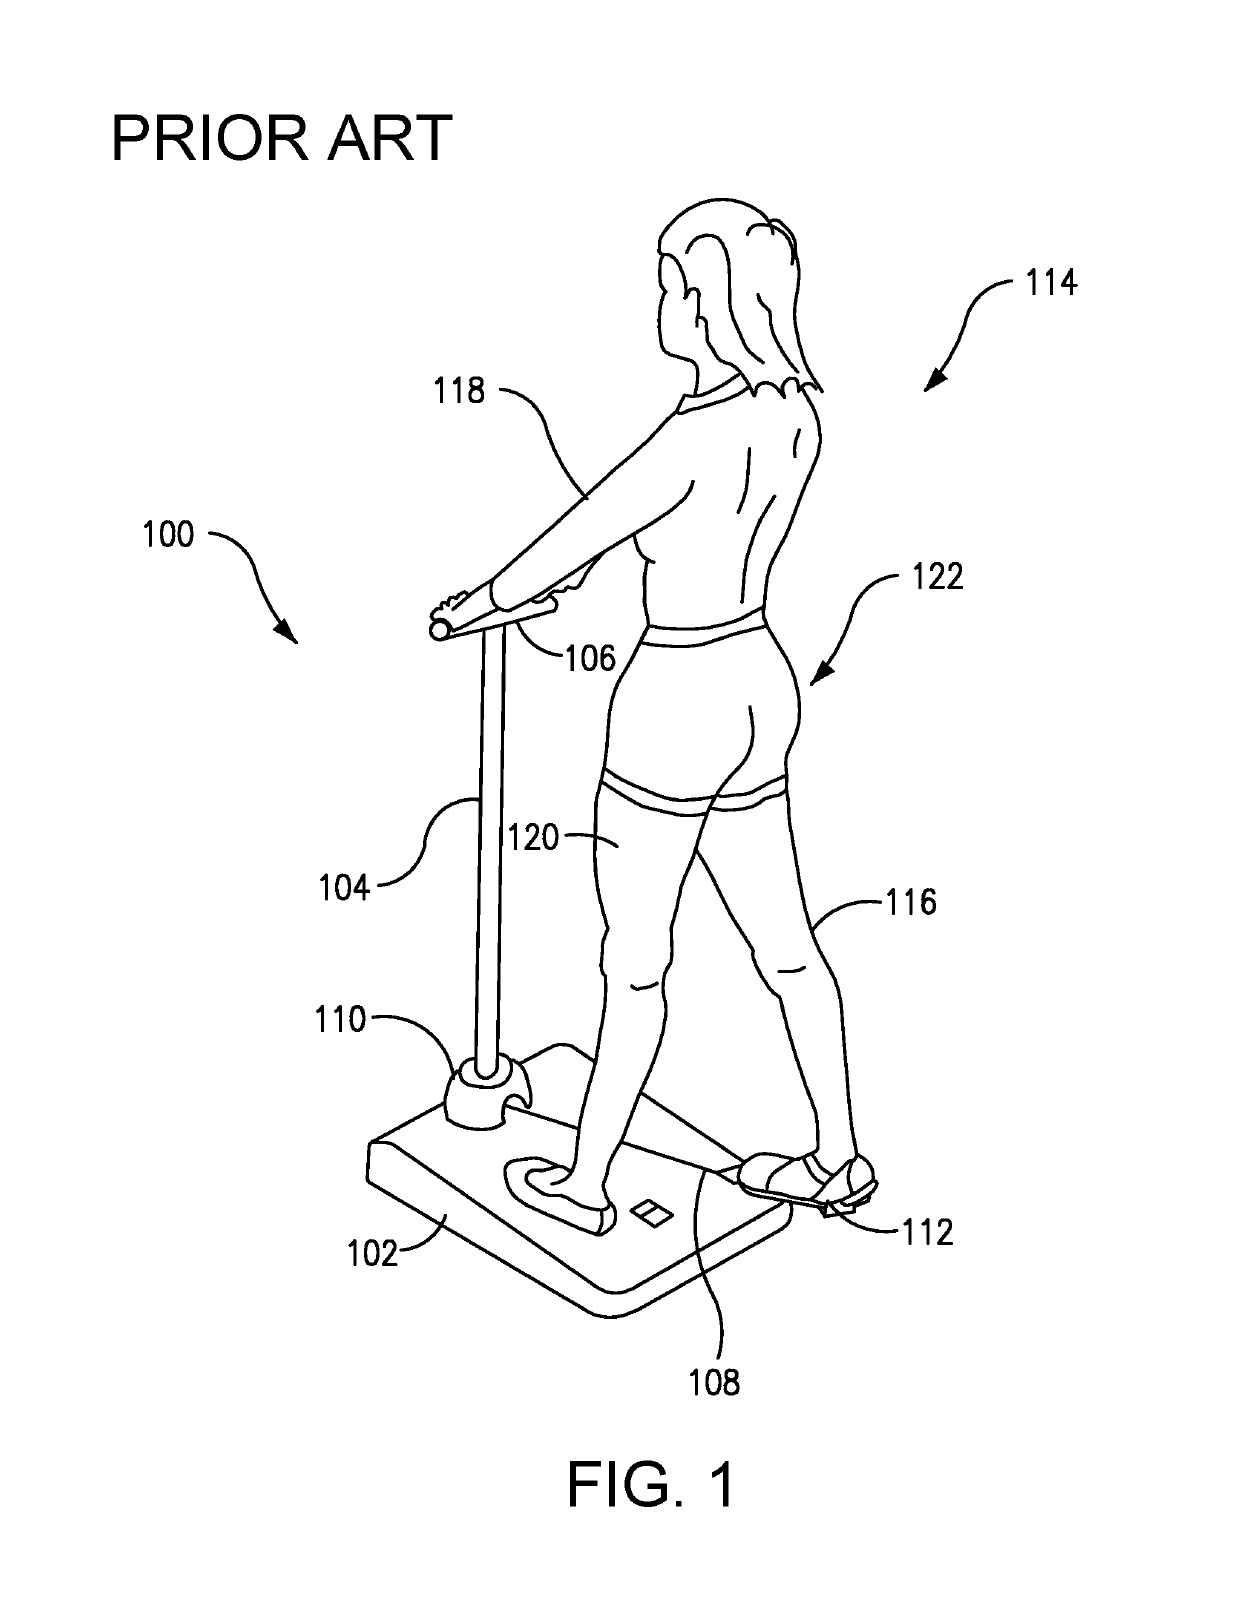 Lower body fitness apparatus for providing enhanced muscle engagement, body stability and range of motion